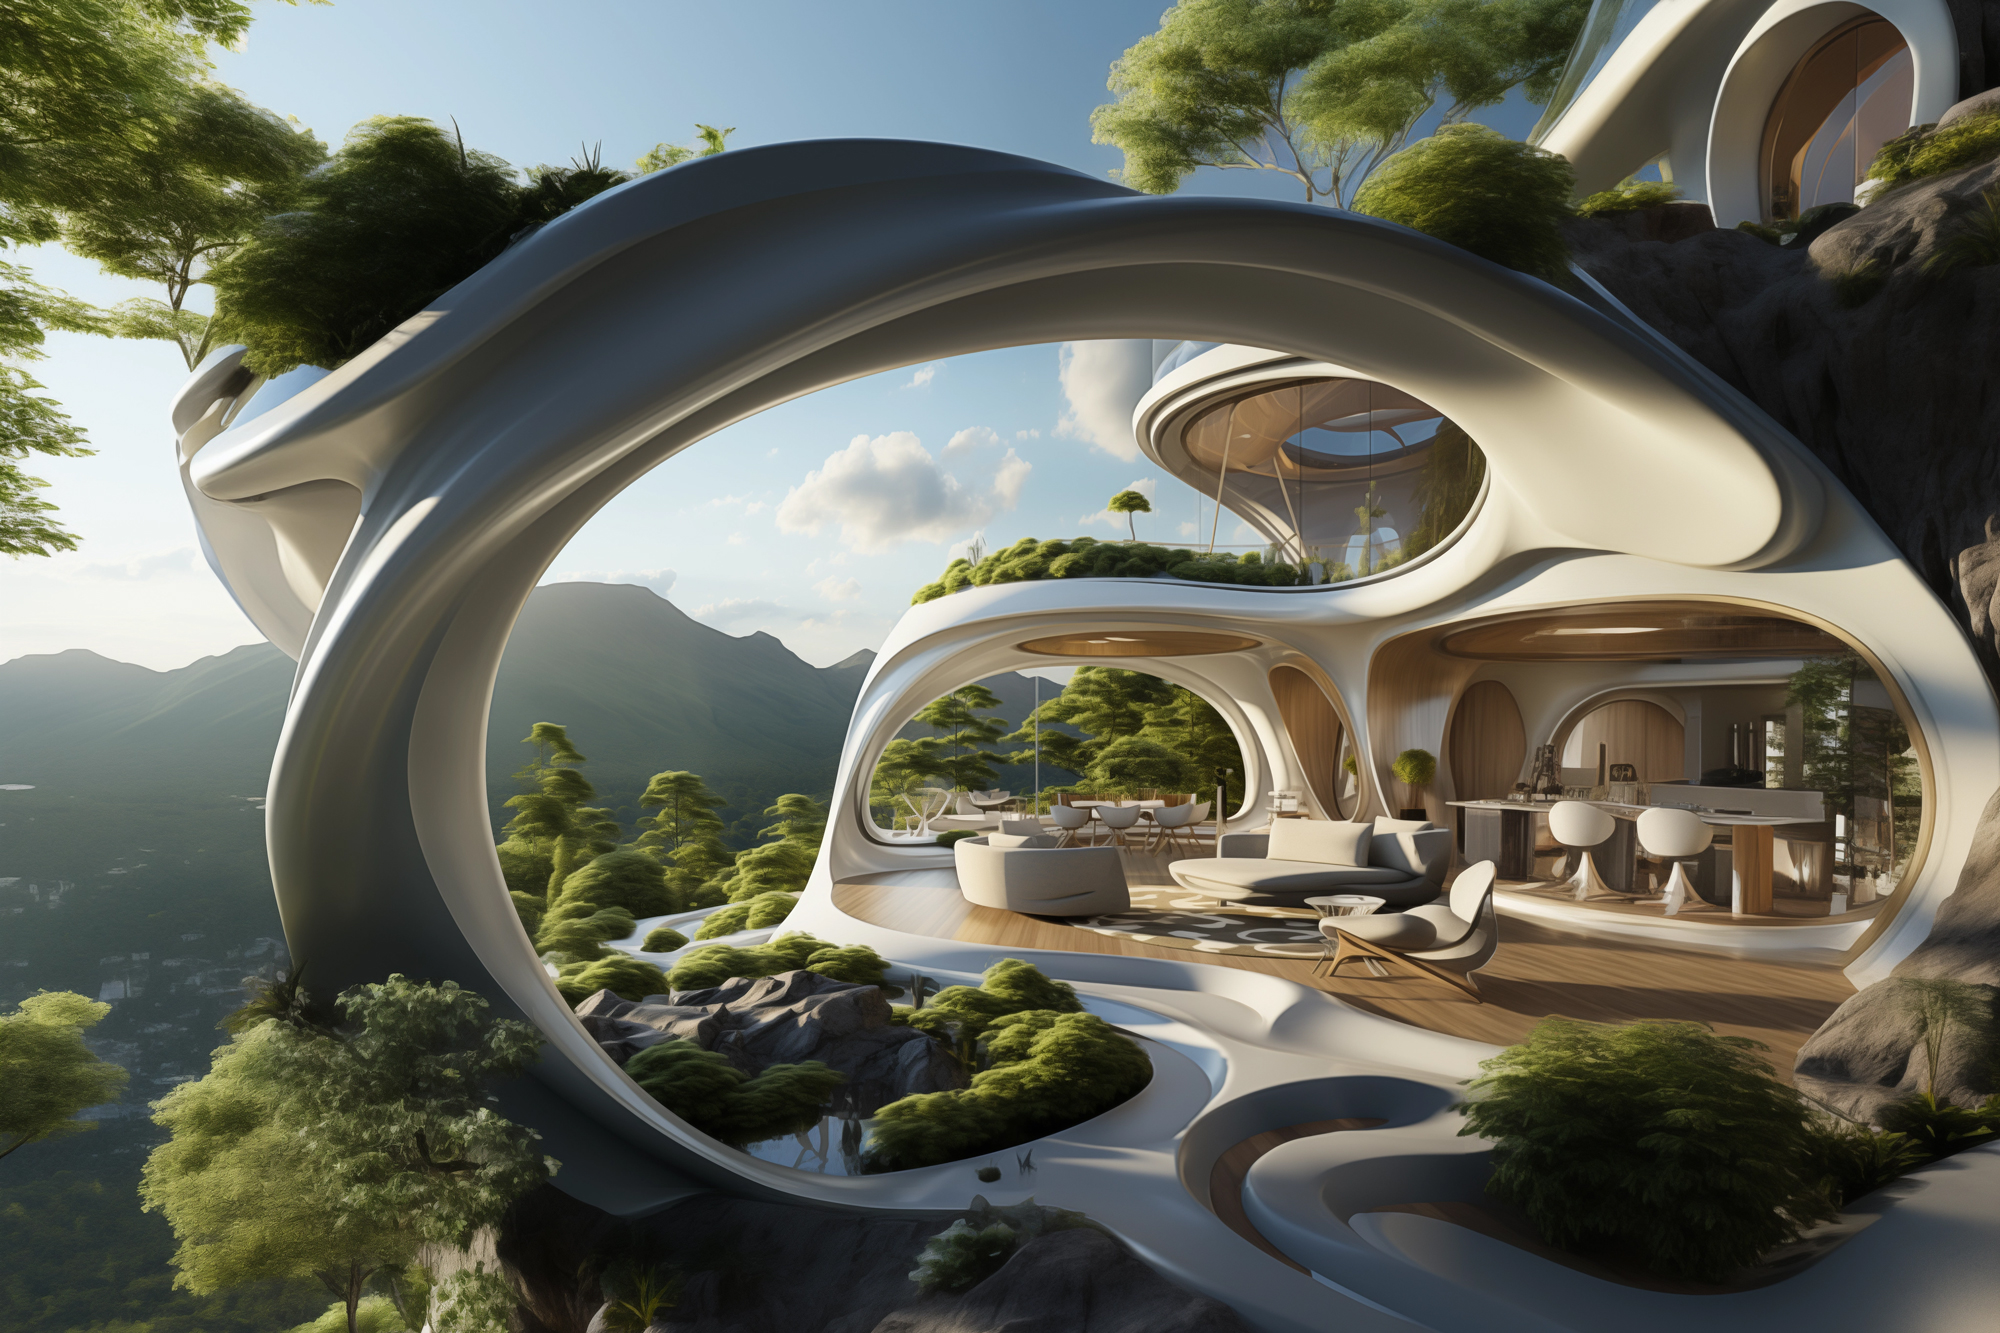 A futuristic 3D-printed home nestled among lush greenery, showcasing the harmony between architecture and nature.